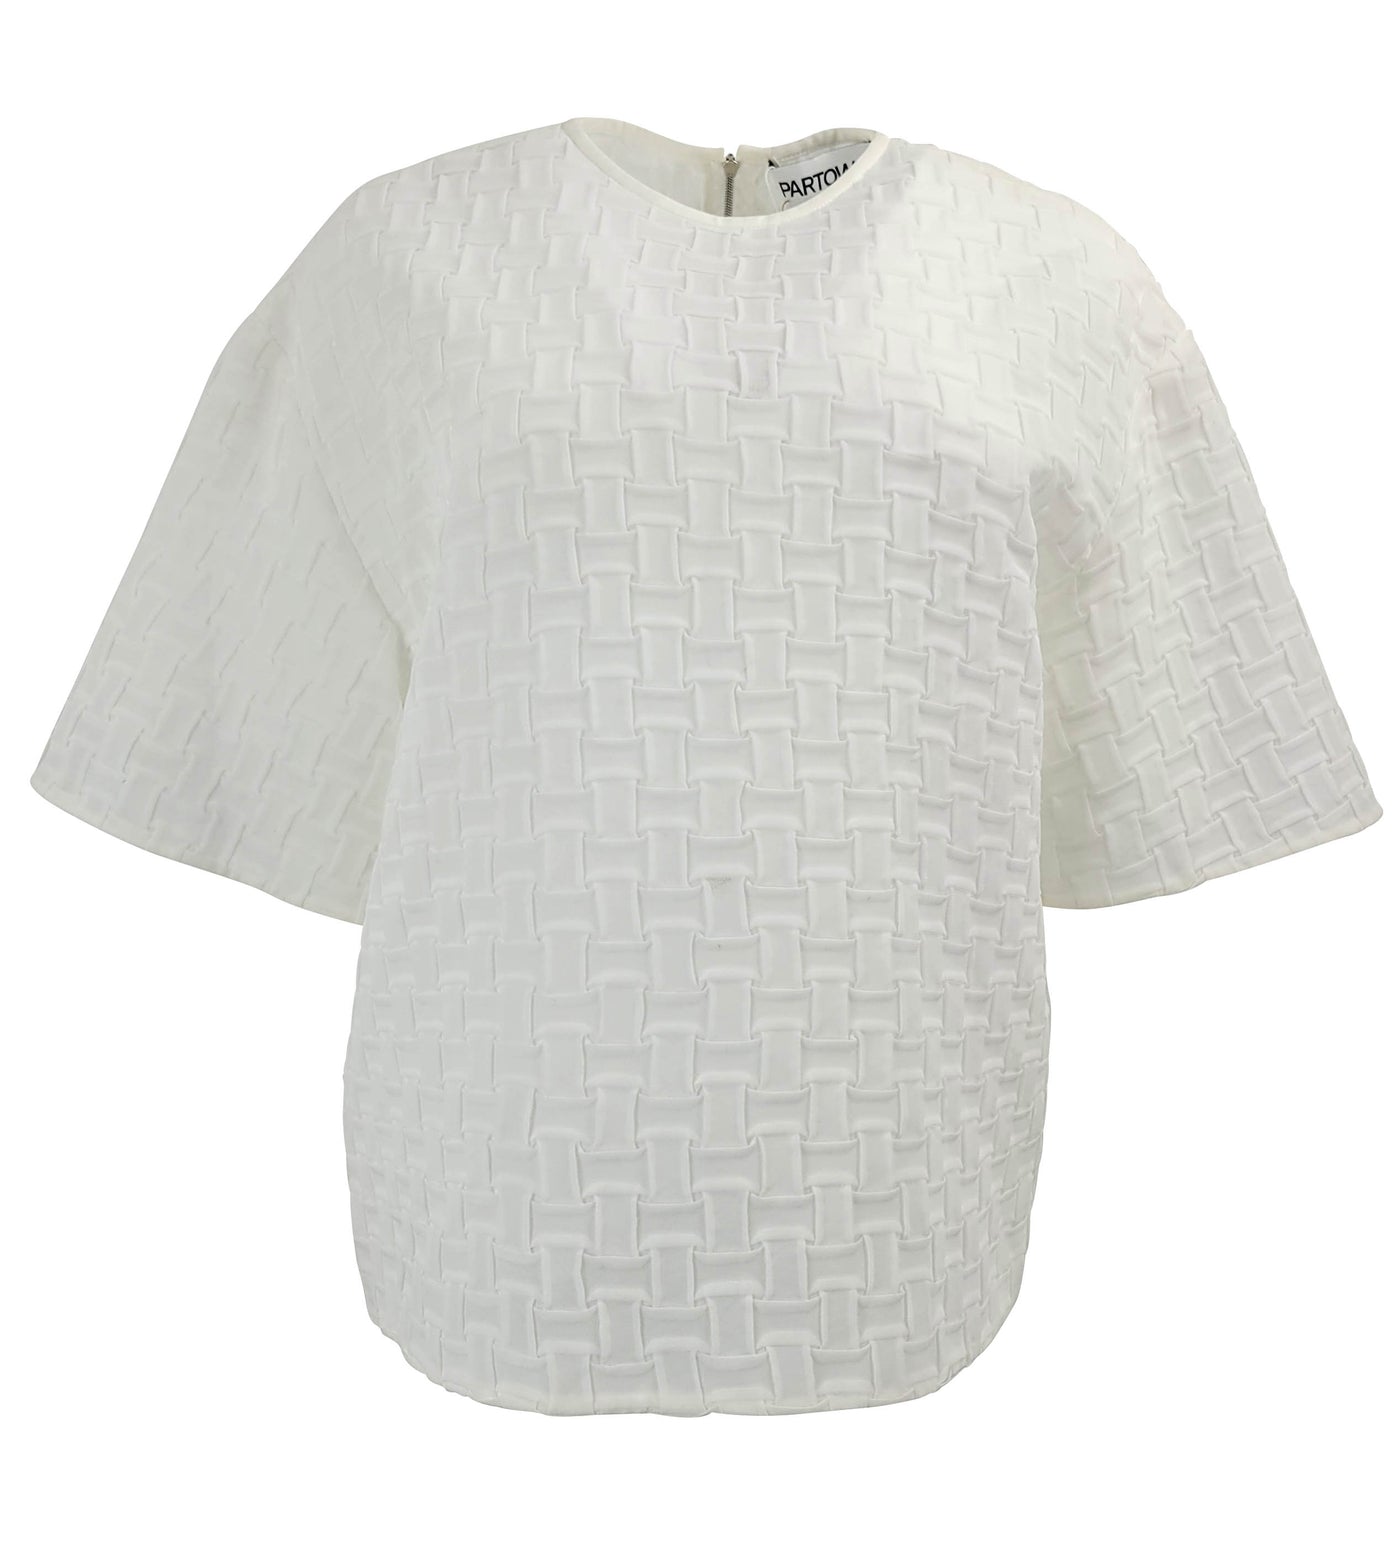 Partow Seraphine Top in White - Discounts on Partow at UAL